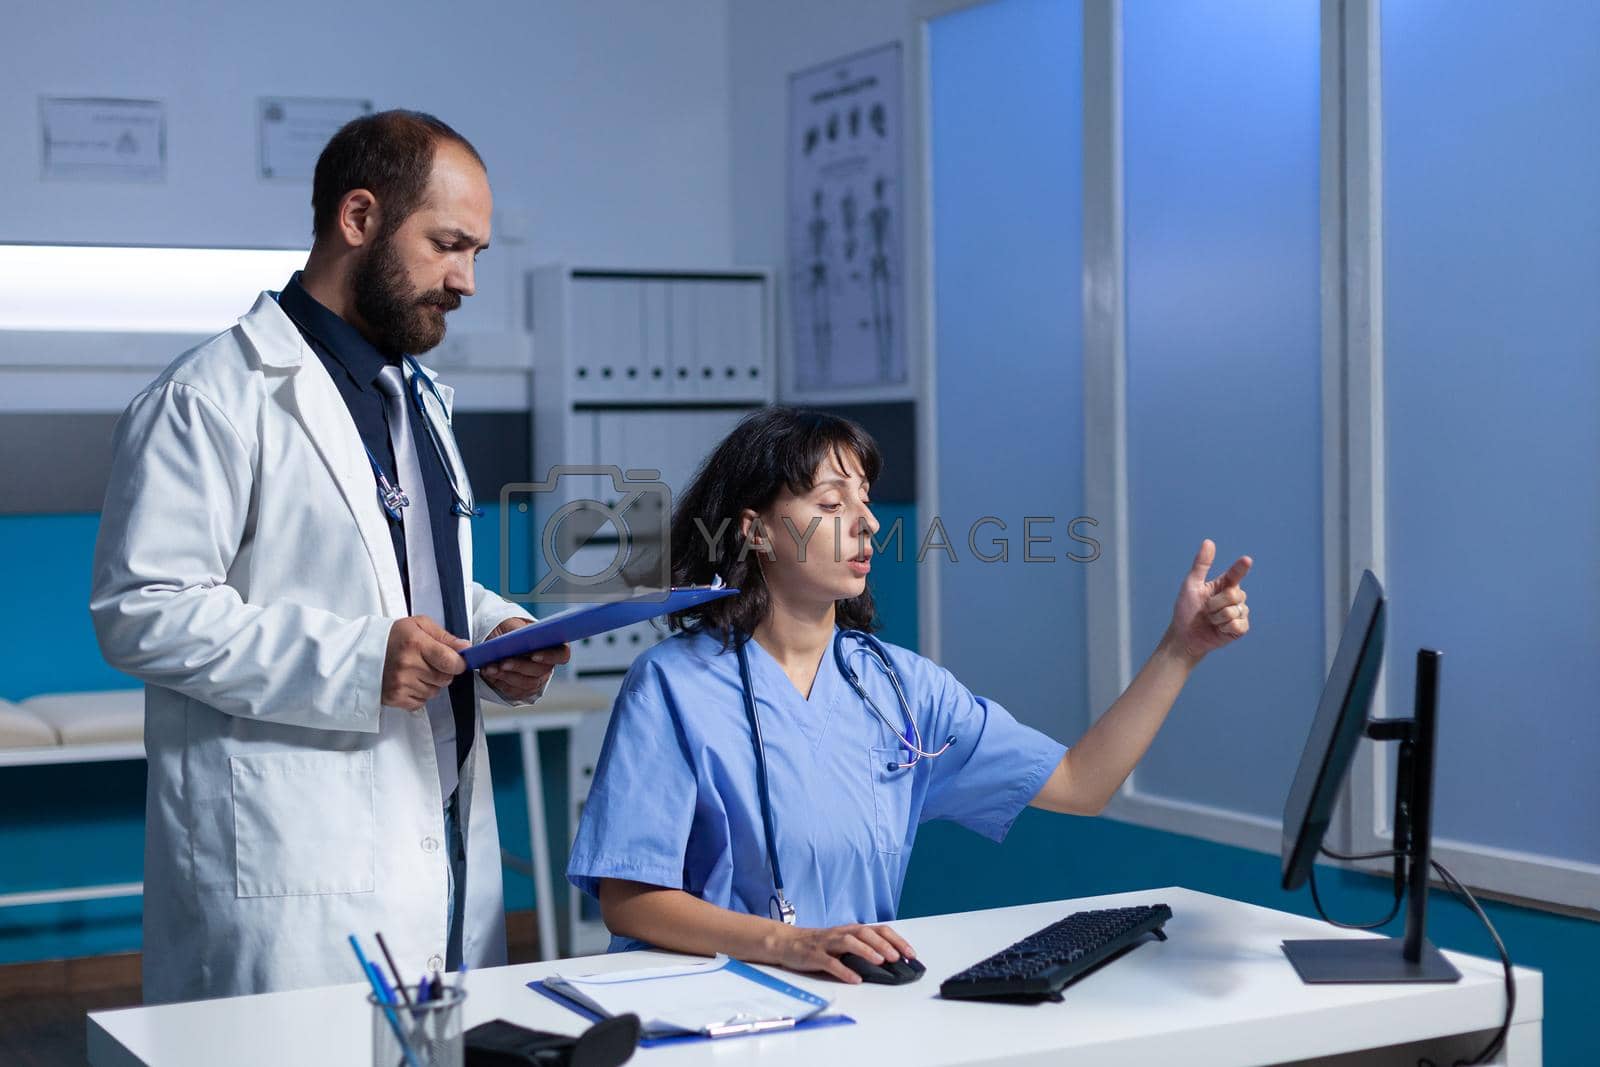 Medical team of specialists looking at computer for healthcare information and examination. Doctor holding checkup files while nurse working with monitor on desk. Man and woman at job